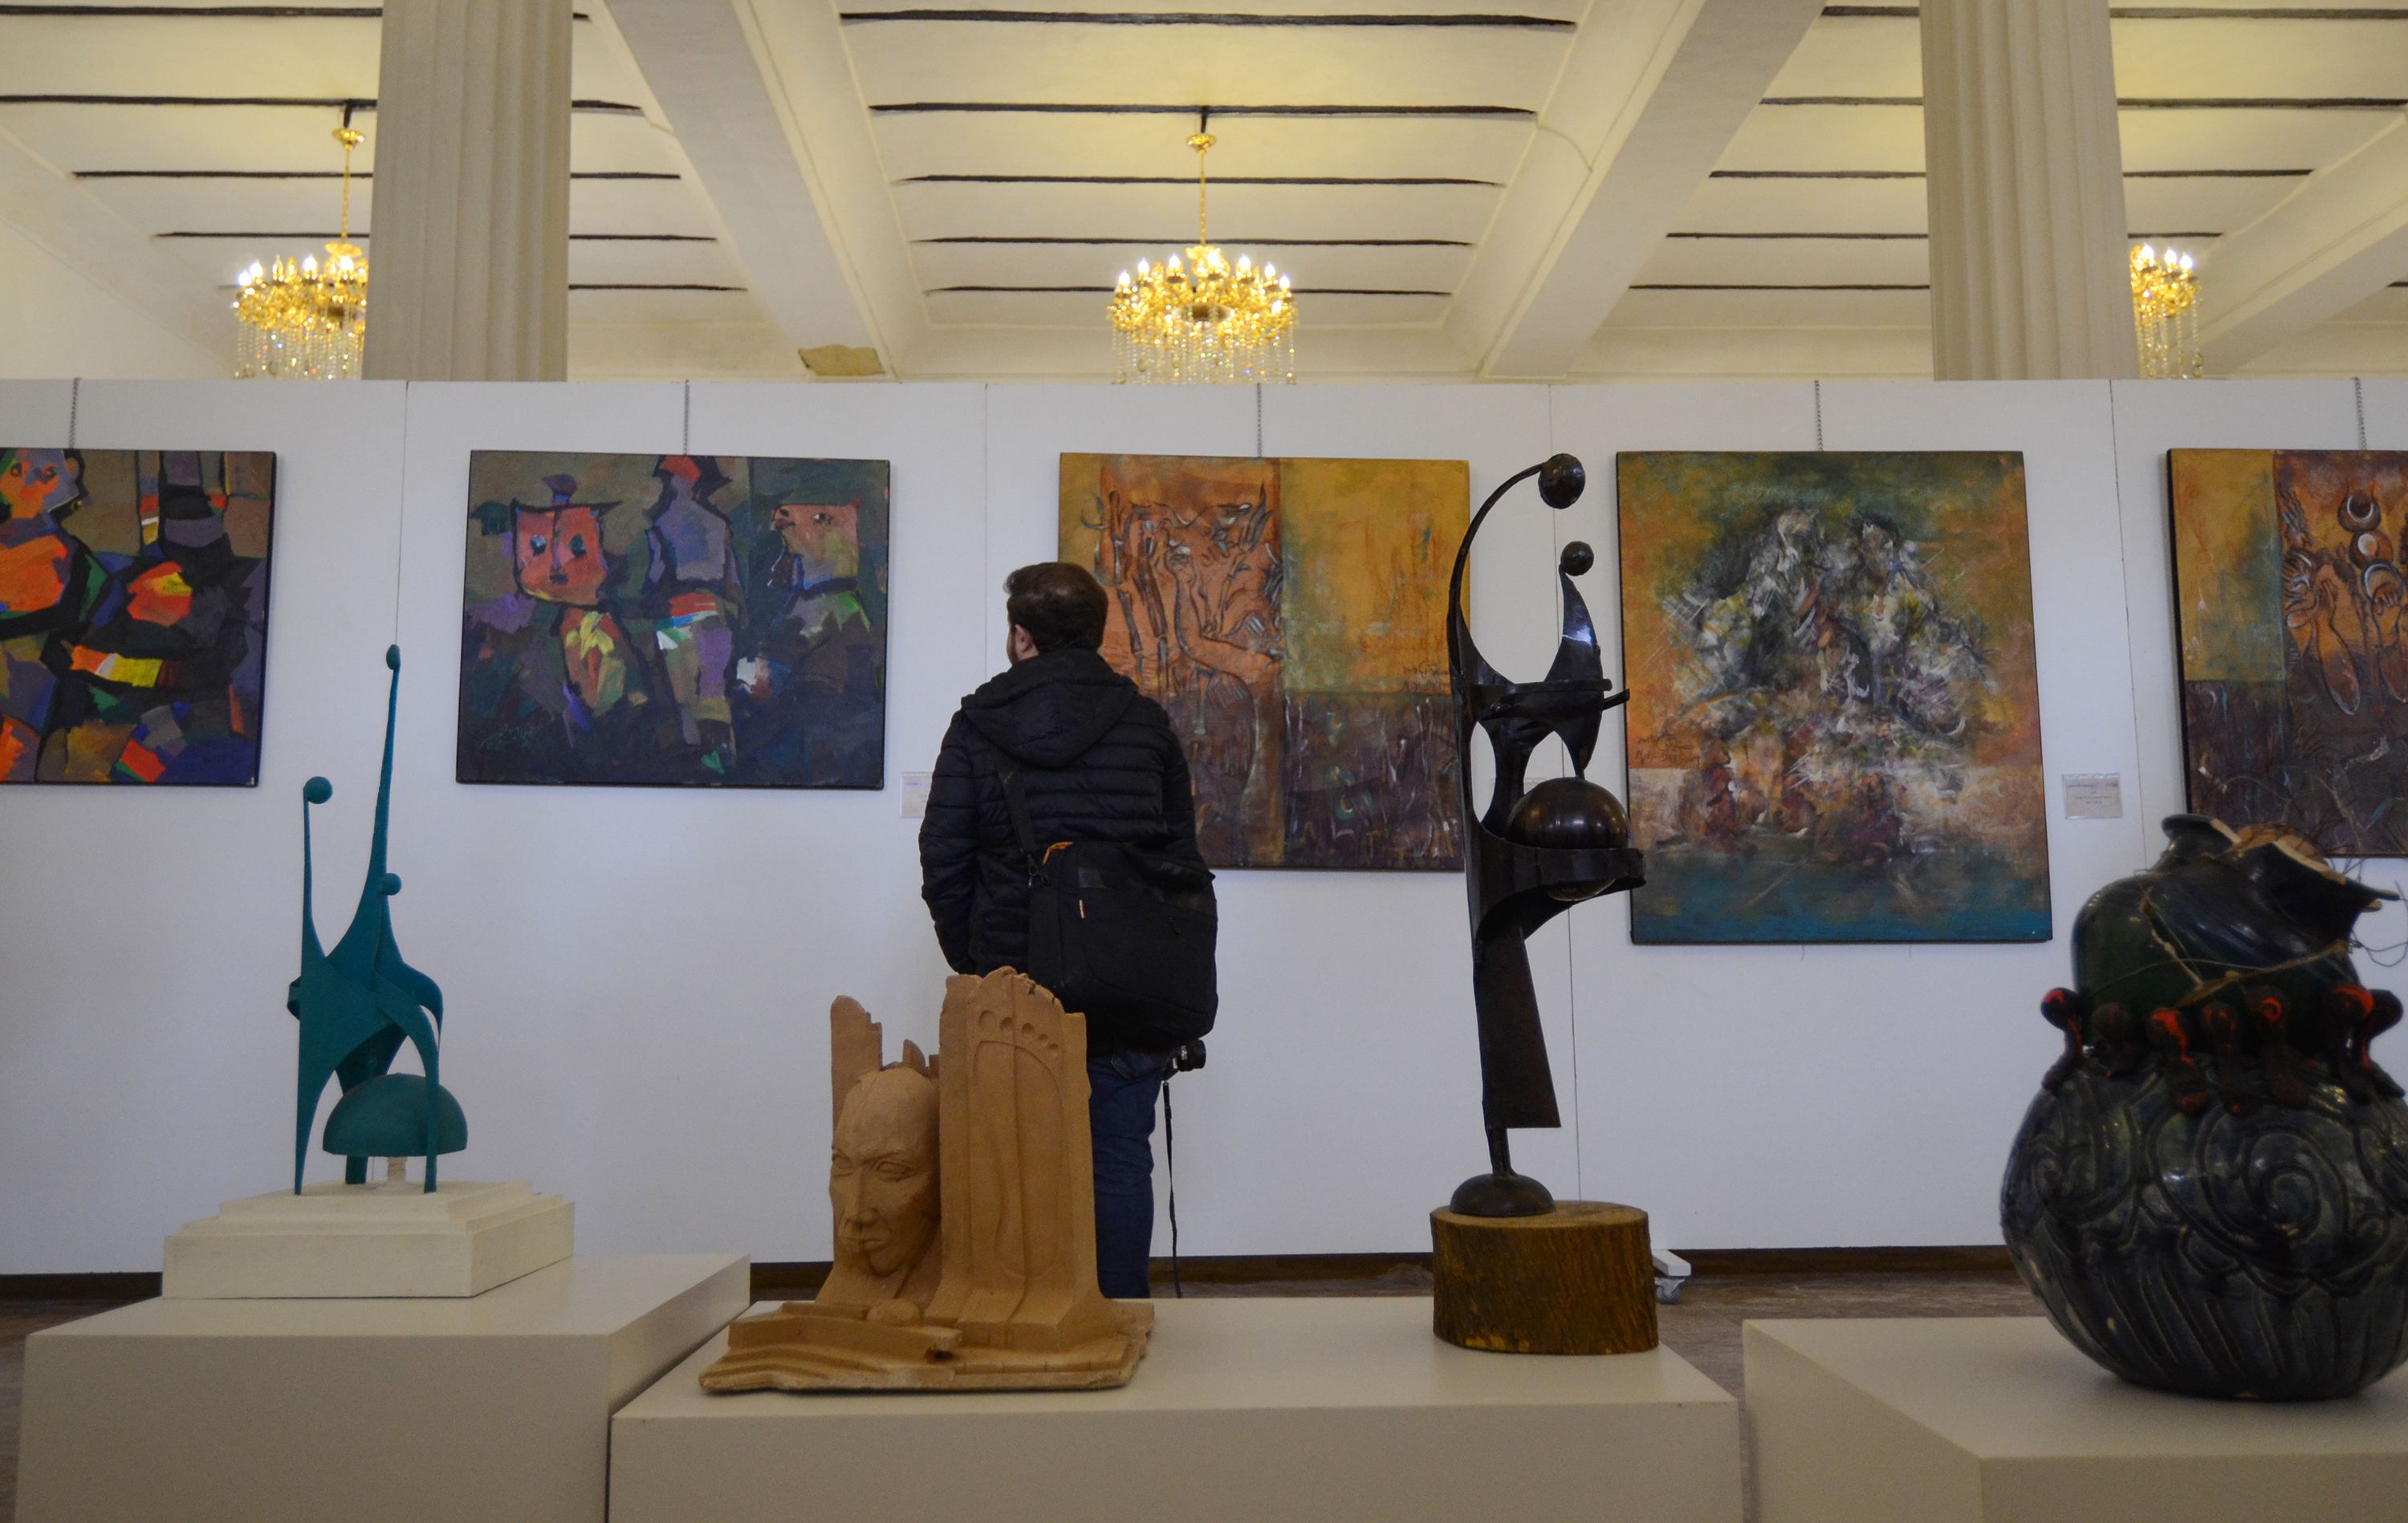 An Iraqi man looks at paintings on January 29, 2019 at a contemporary art exhibition at one of the halls of the national museum of the northern Iraqi city of Mosul.